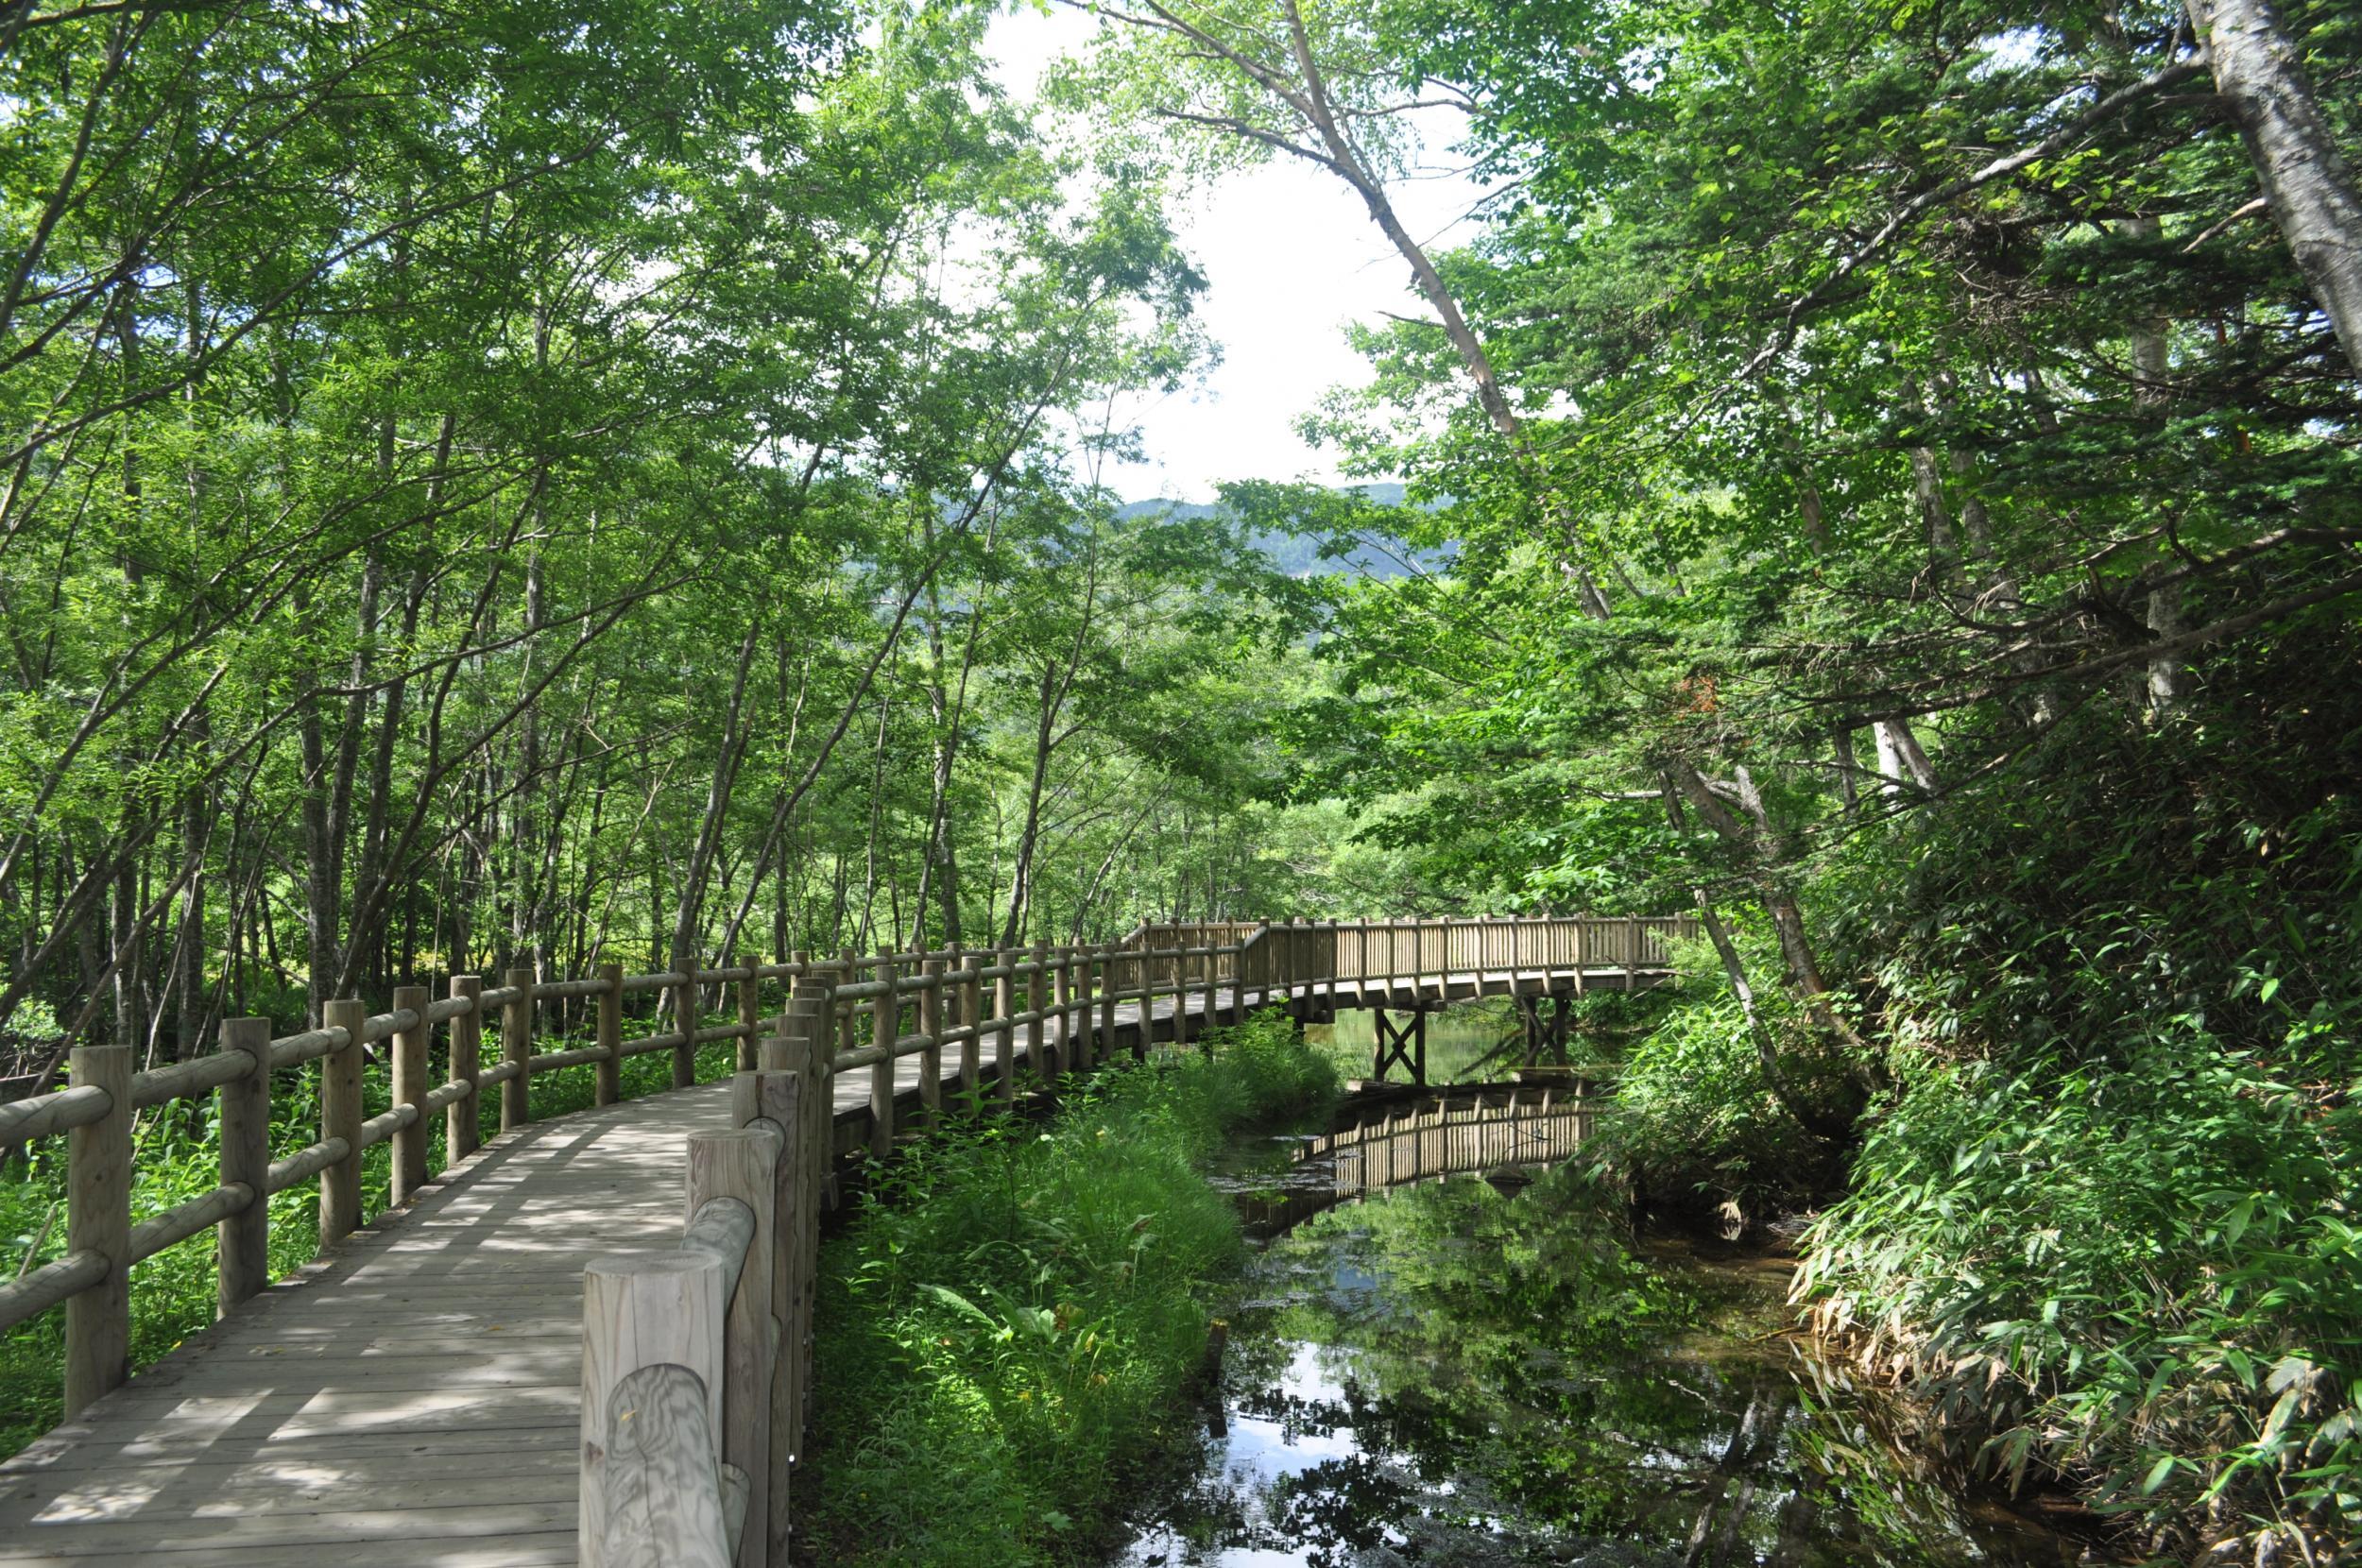 Kamikochi is quieter and ideal for forest-bathing